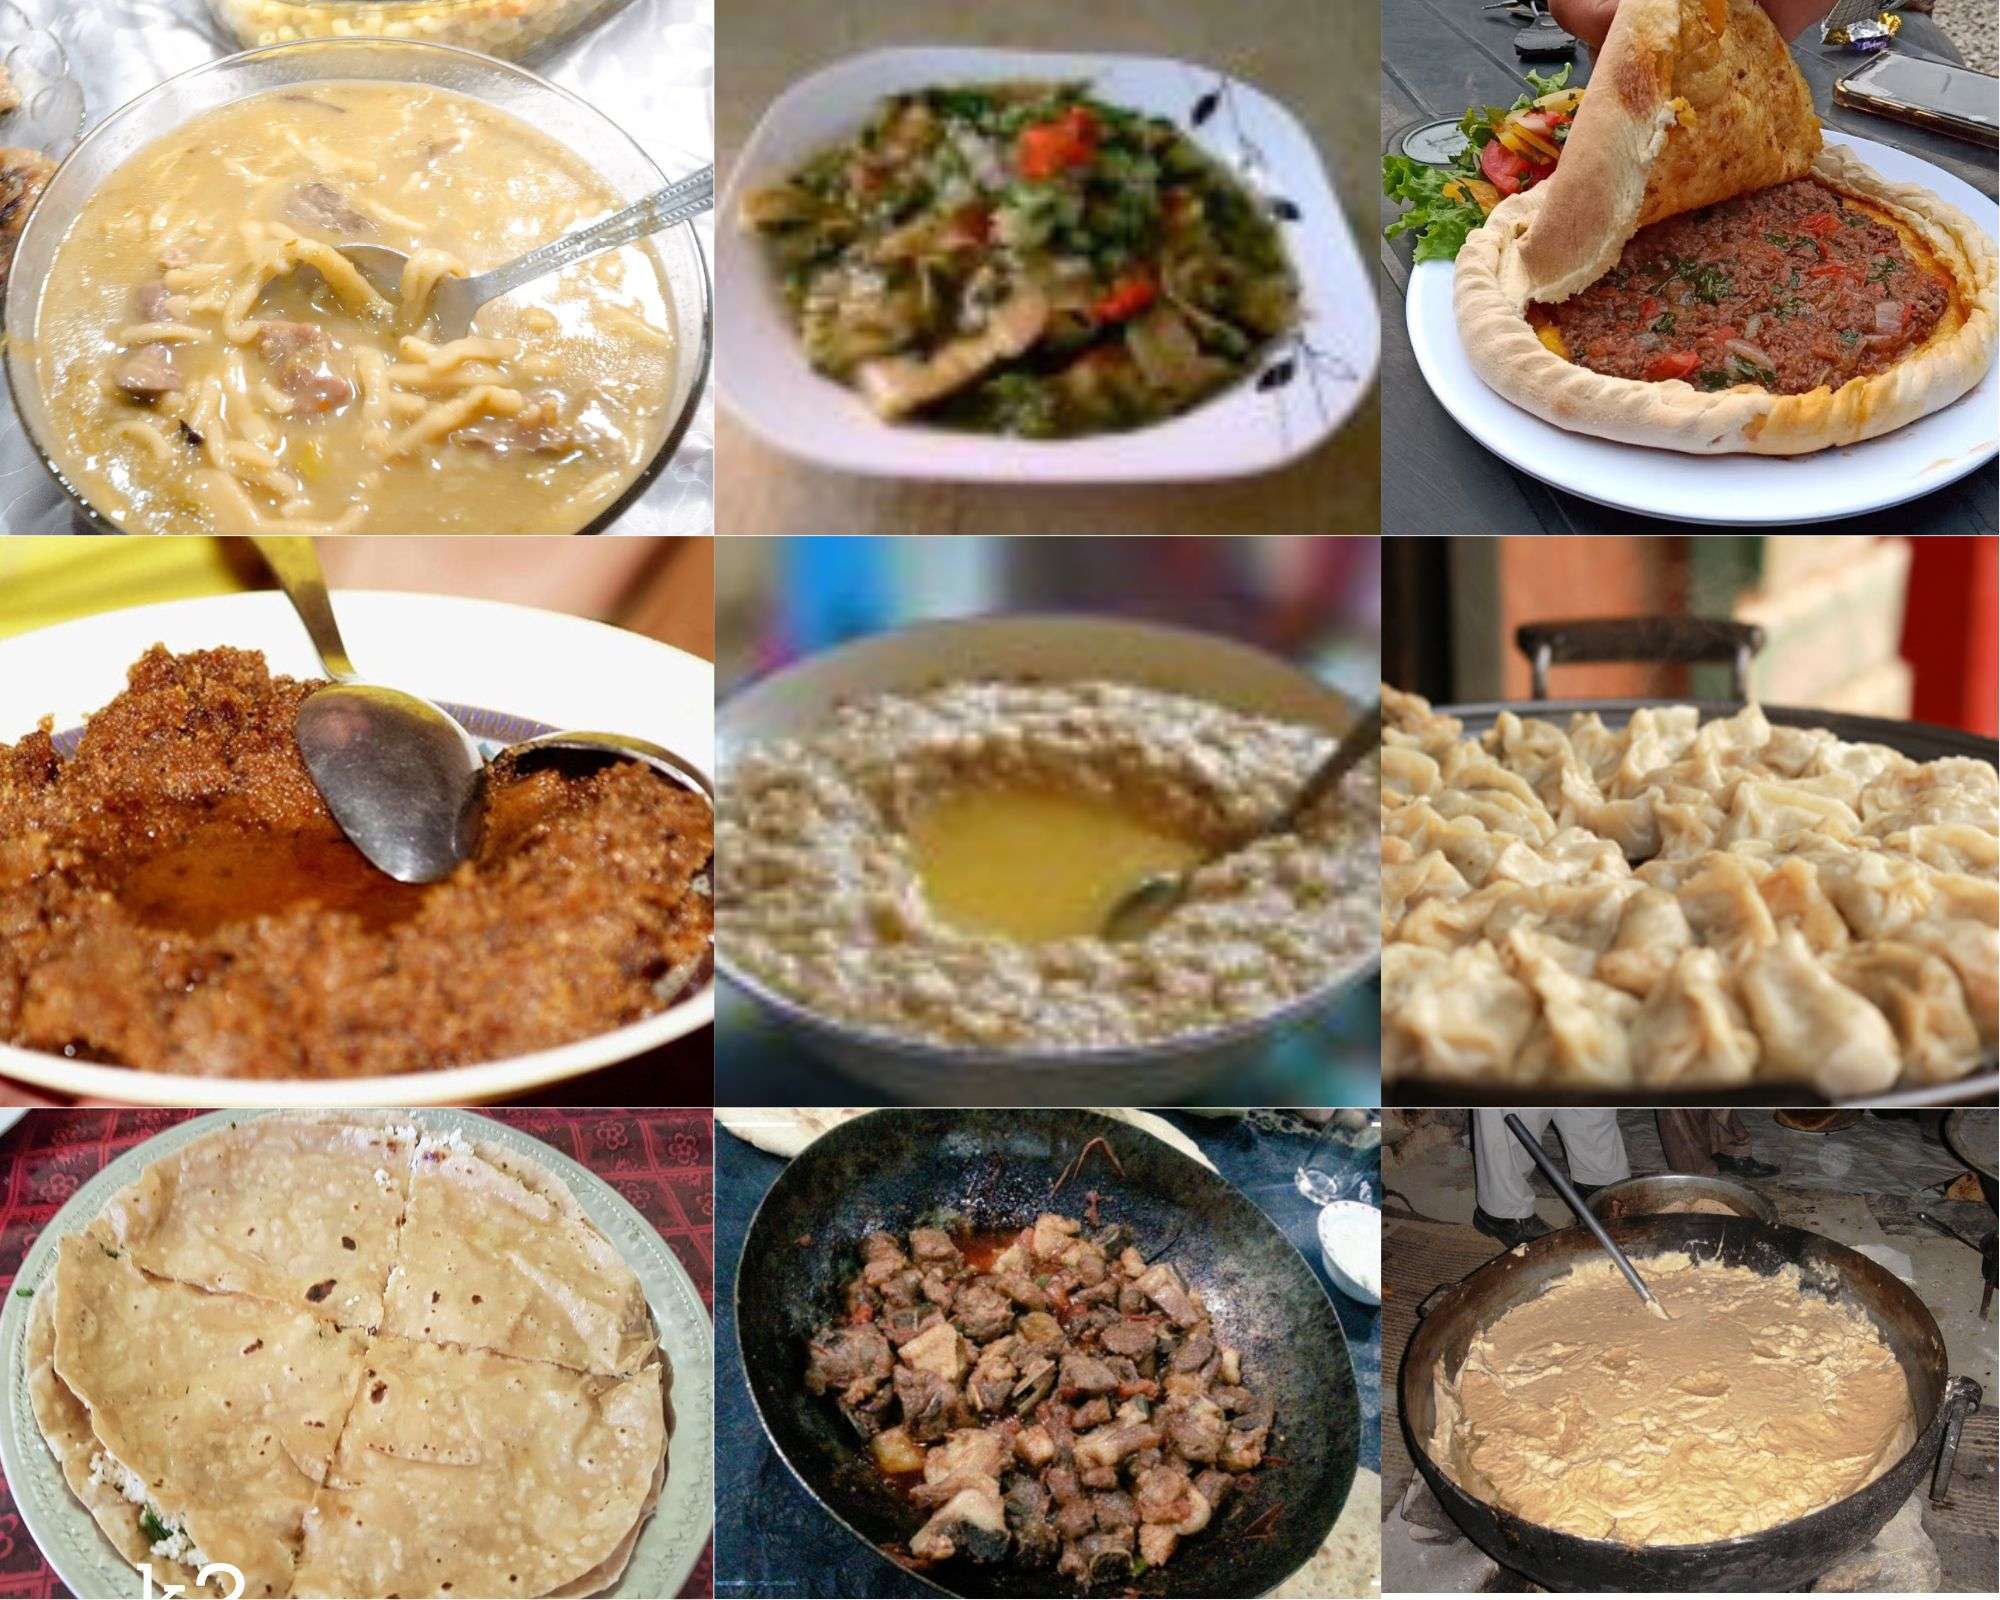 Cultural dishes of Gilgit Baltistan according to cities